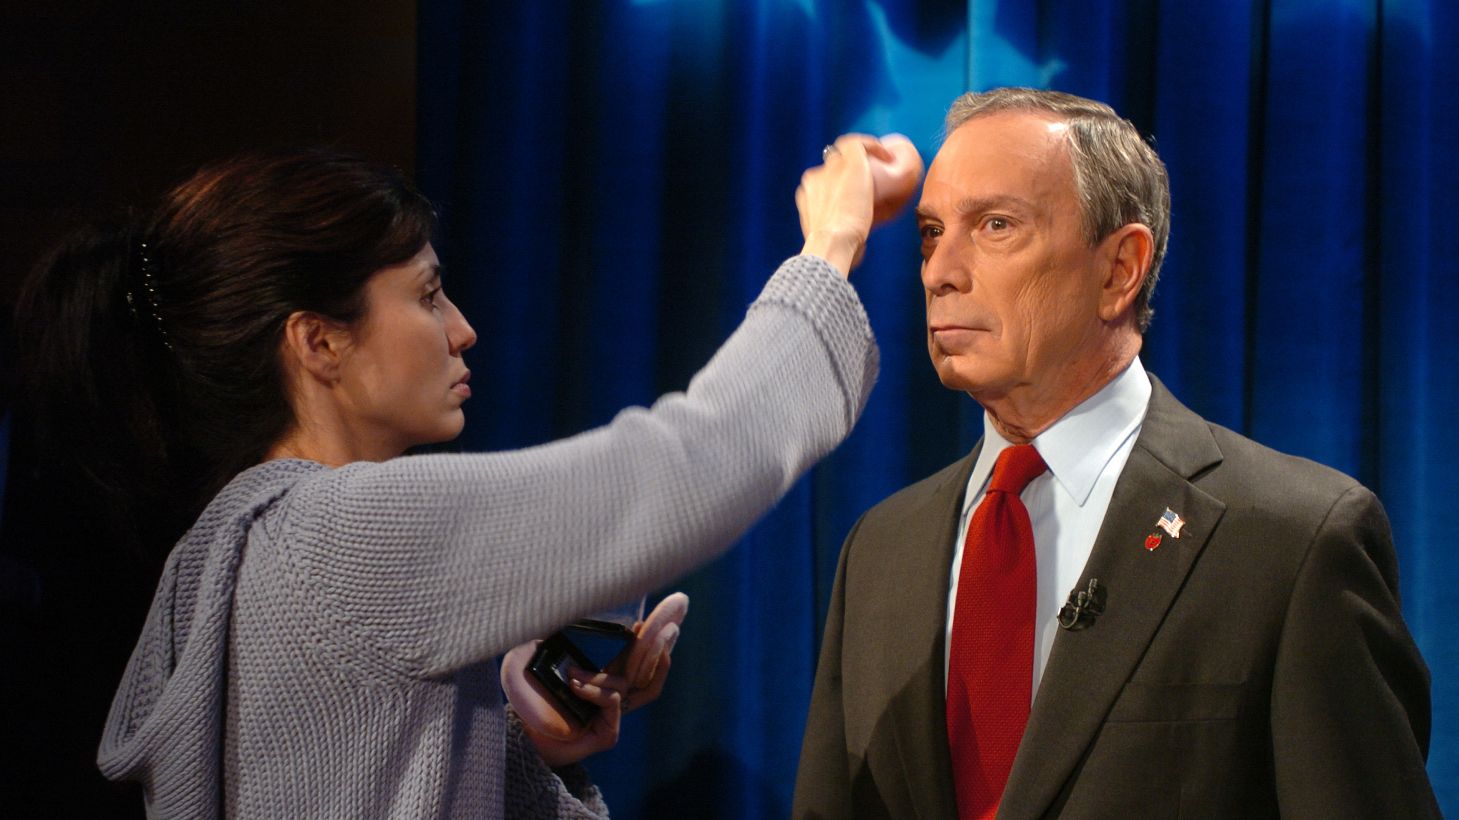 What prior debates tell us about Mike Bloomberg under pressure